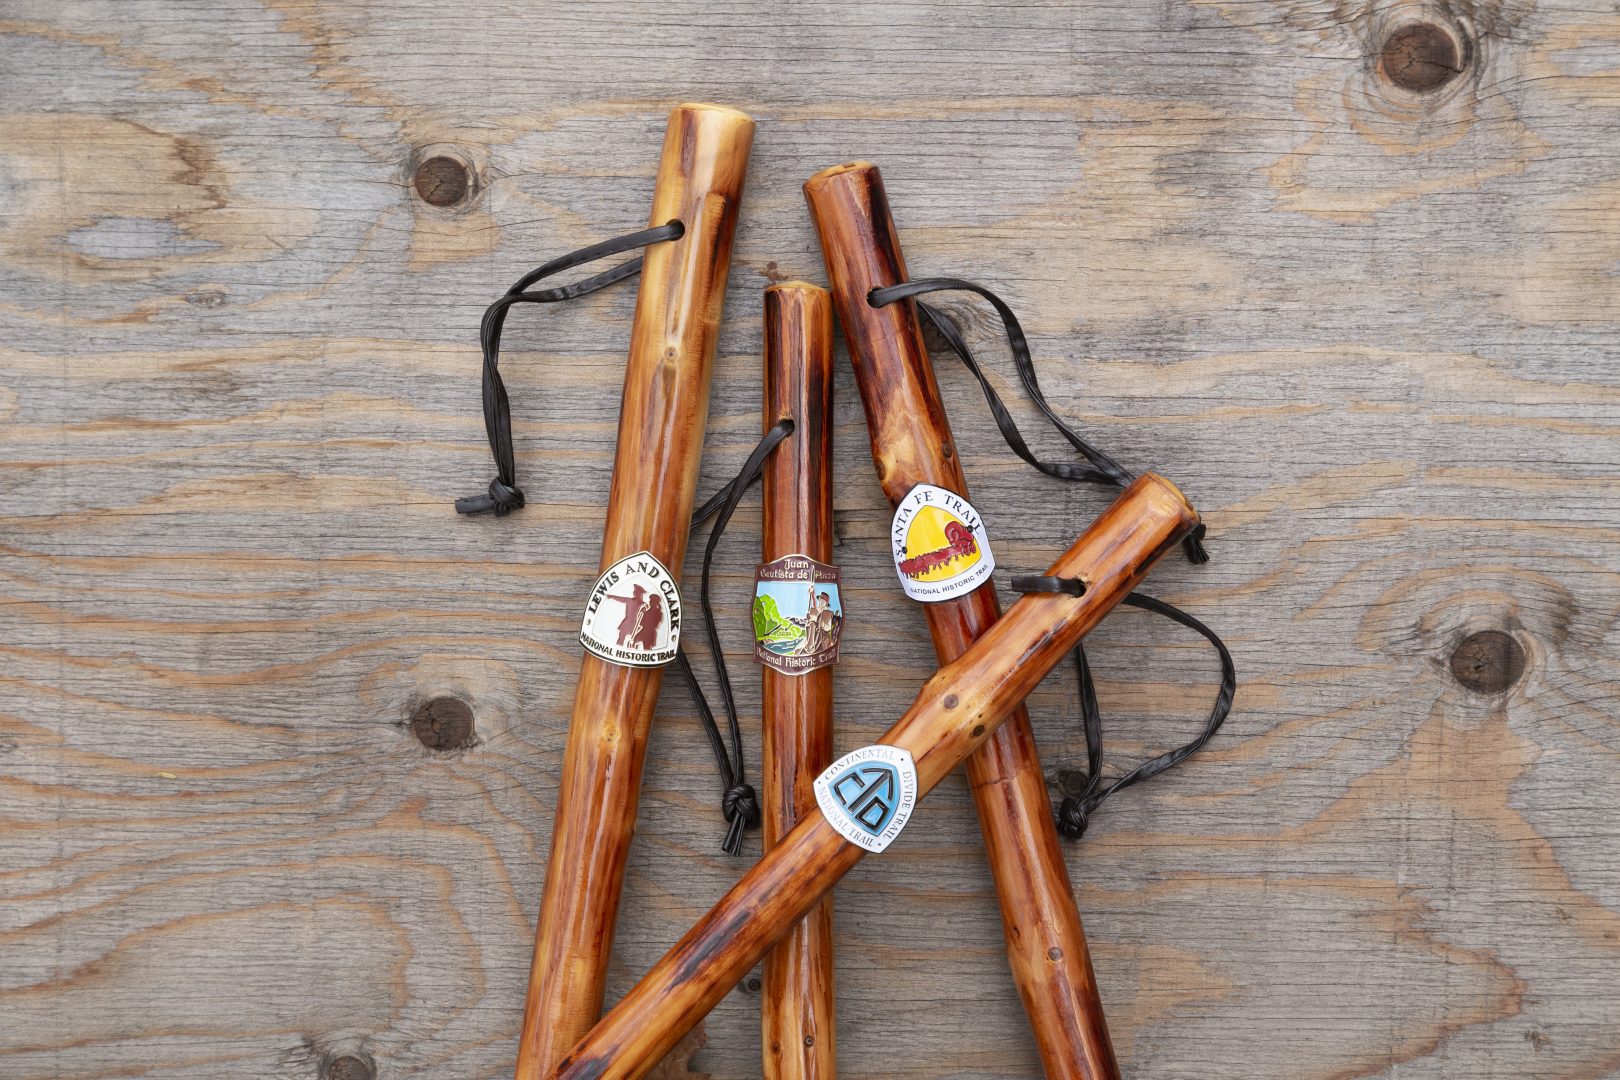 Several walking sticks with trail logos